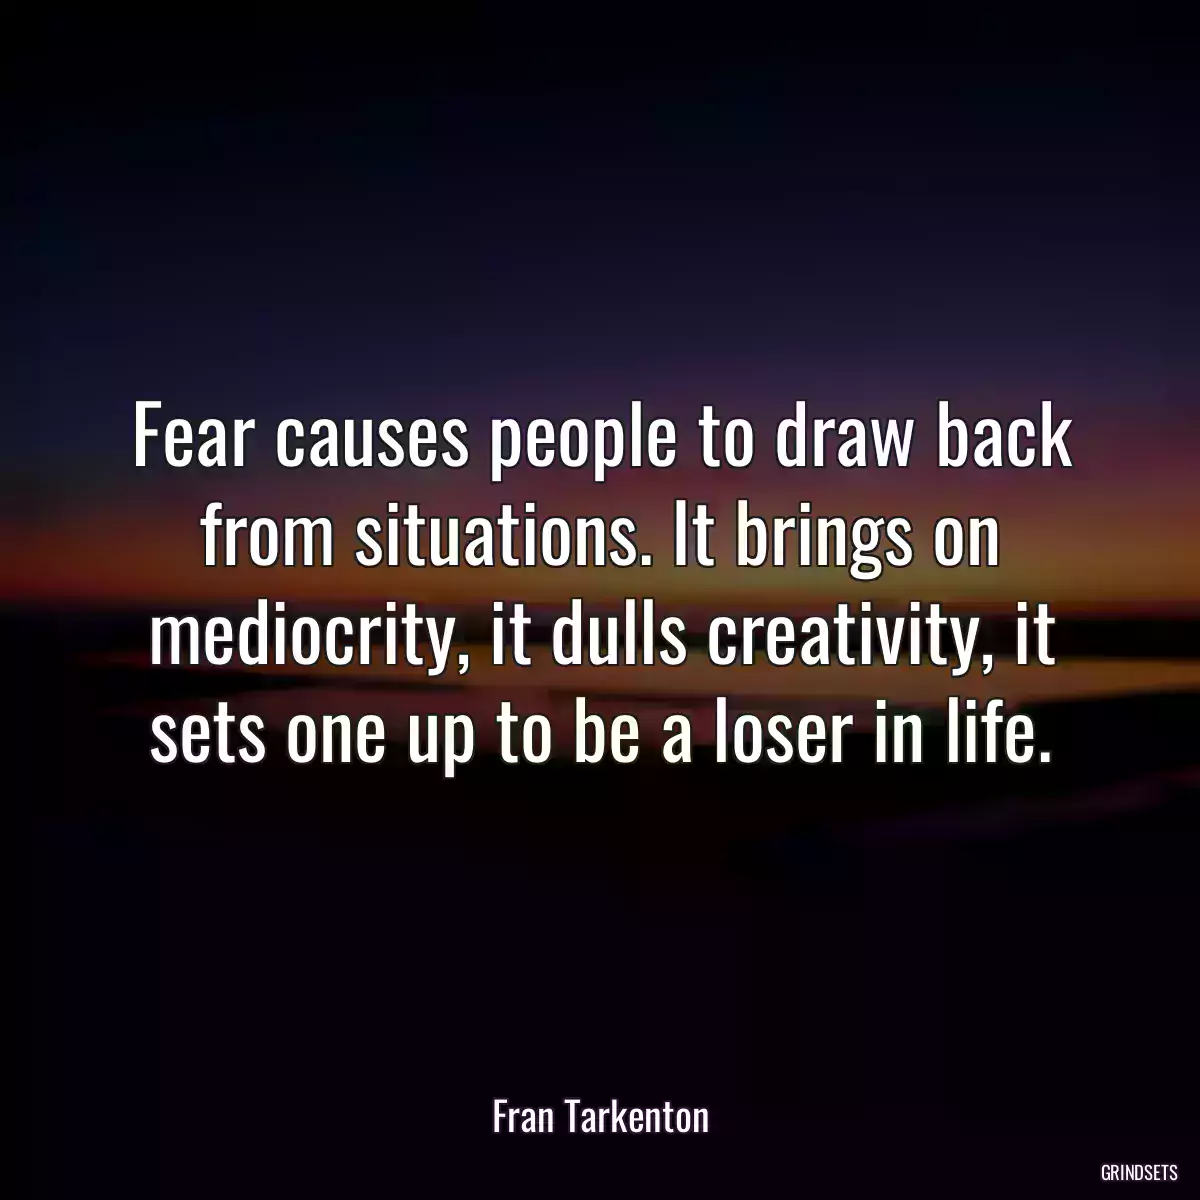 Fear causes people to draw back from situations. It brings on mediocrity, it dulls creativity, it sets one up to be a loser in life.